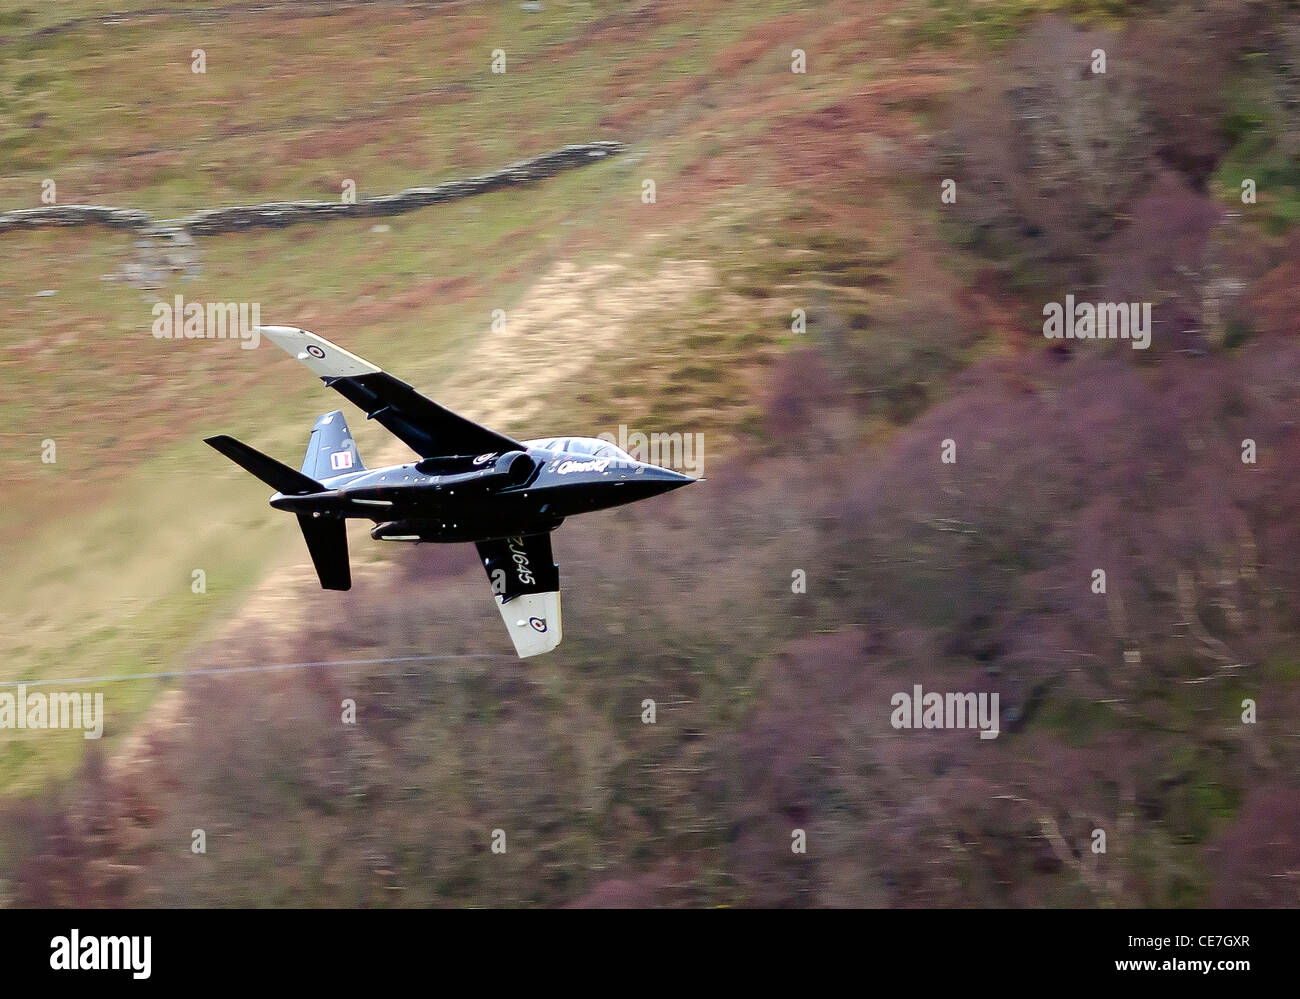 A Royal Air Force Dassault/Dornier Alpha Jet aircraft at low level on a low flying training flight over the hills of mid Wales Stock Photo